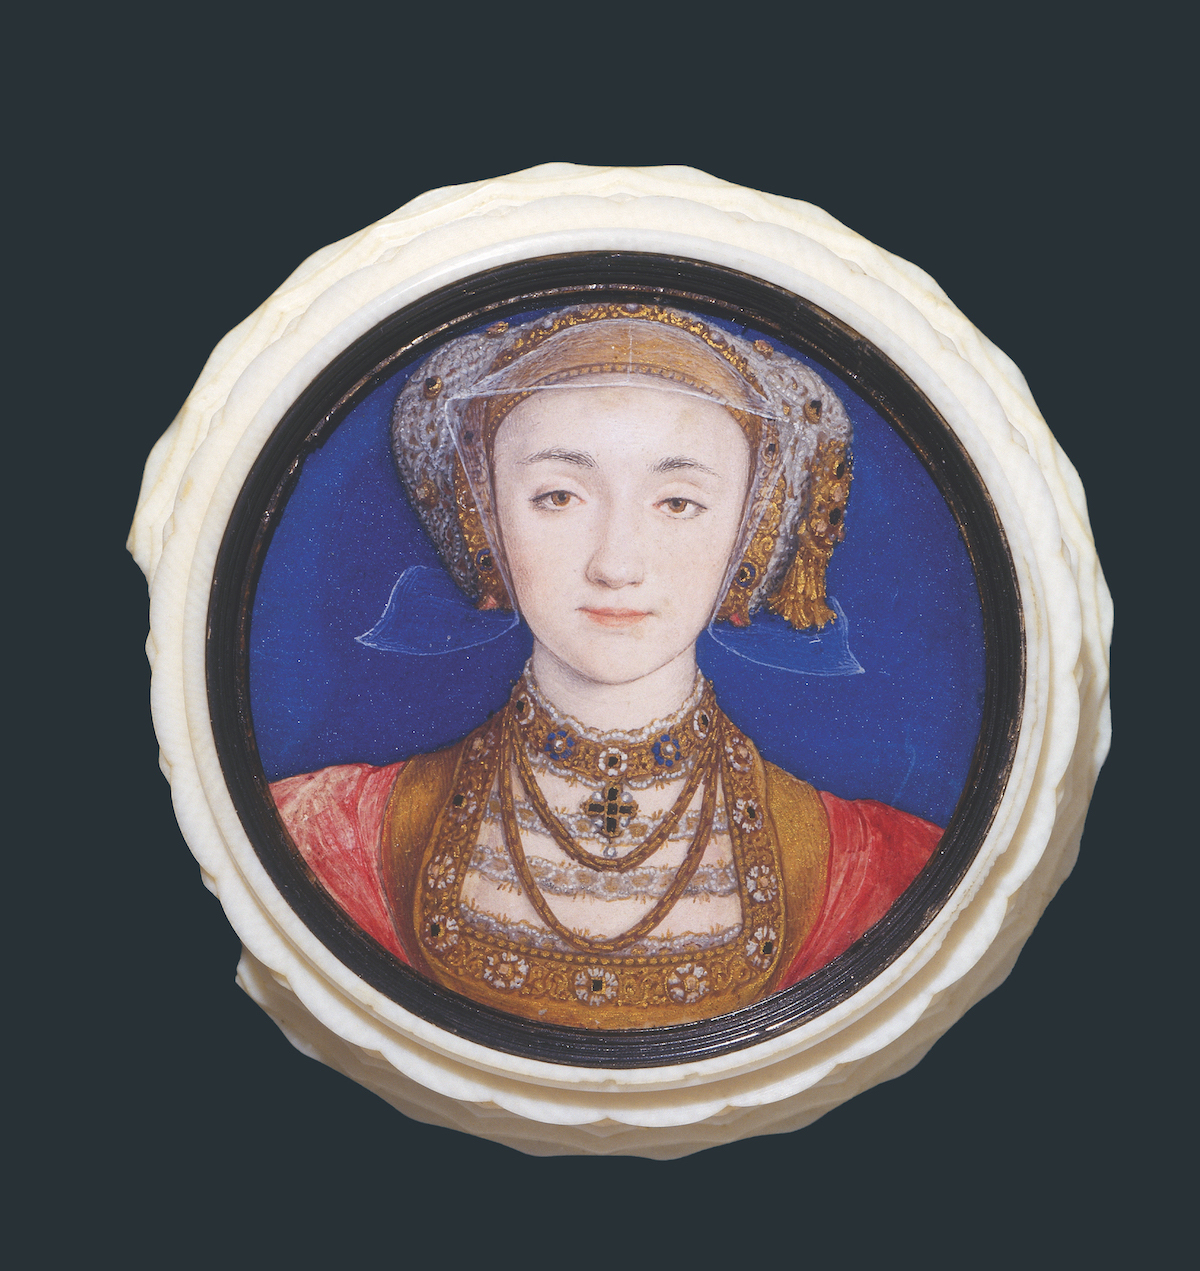 Portrait of Anne of Cleves, by Hans Holbein the Younger, 1539. The Victoria & Albert Museum.